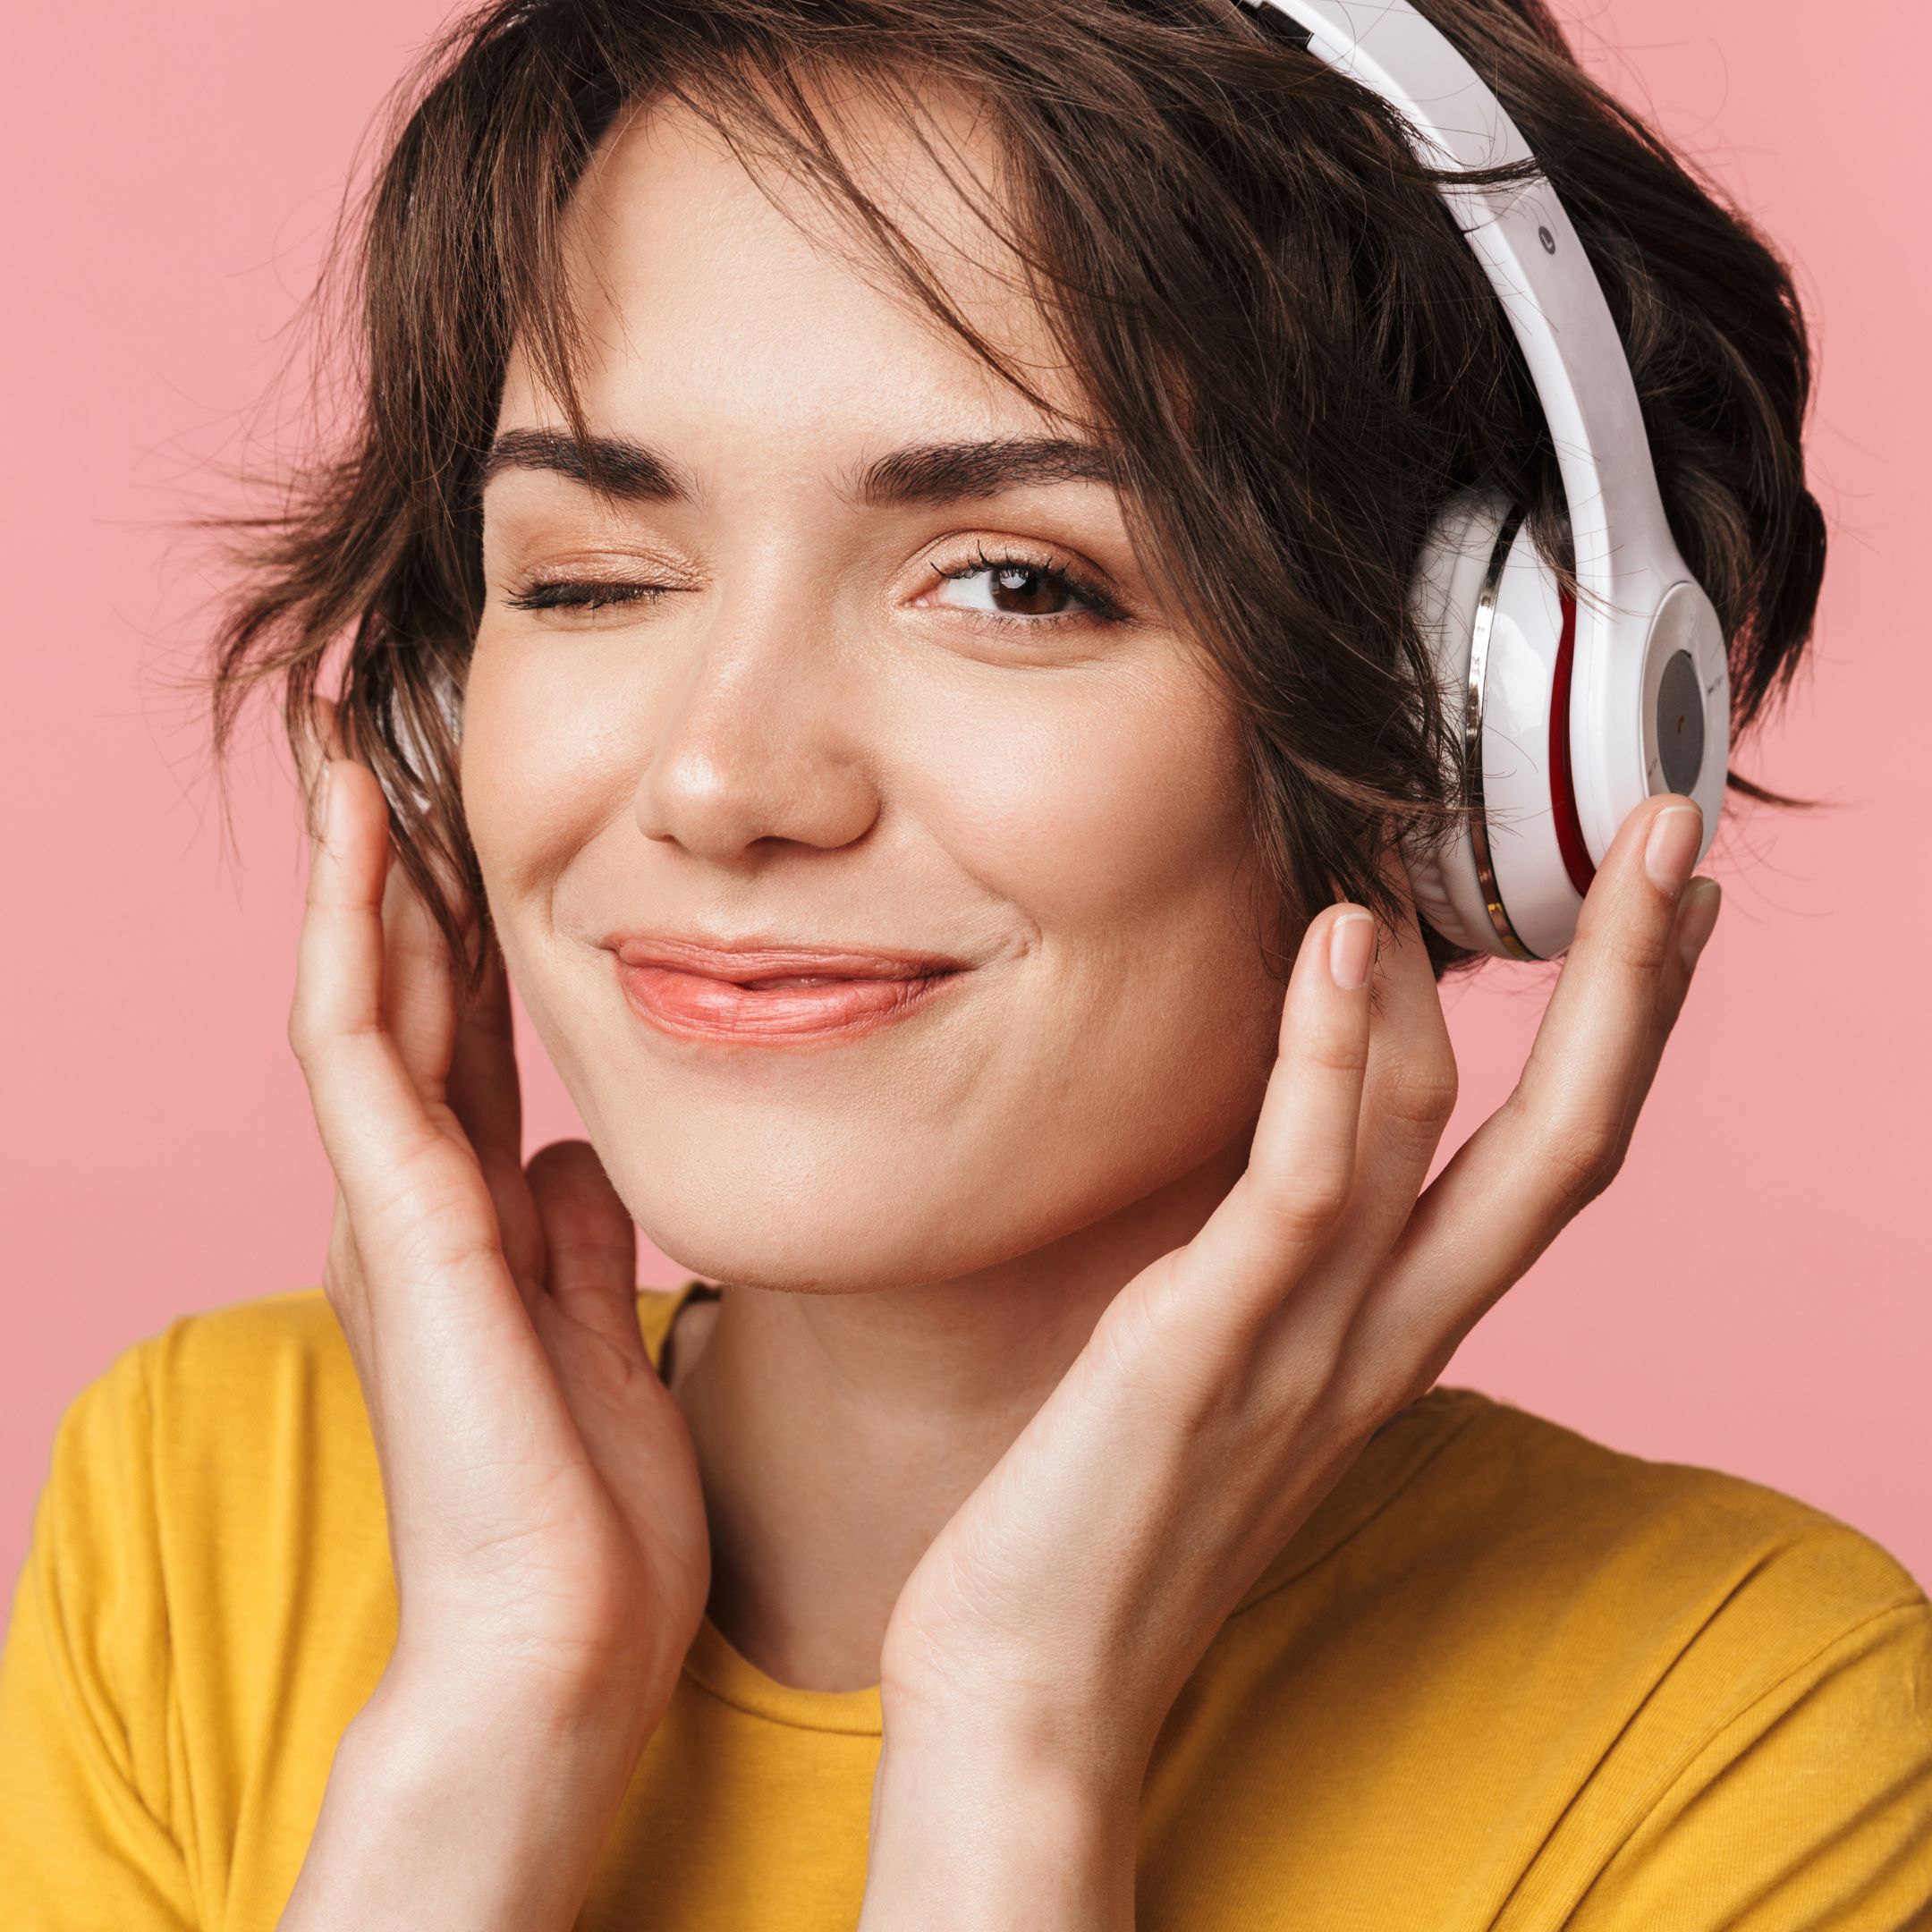 Young lady with headphones smiling